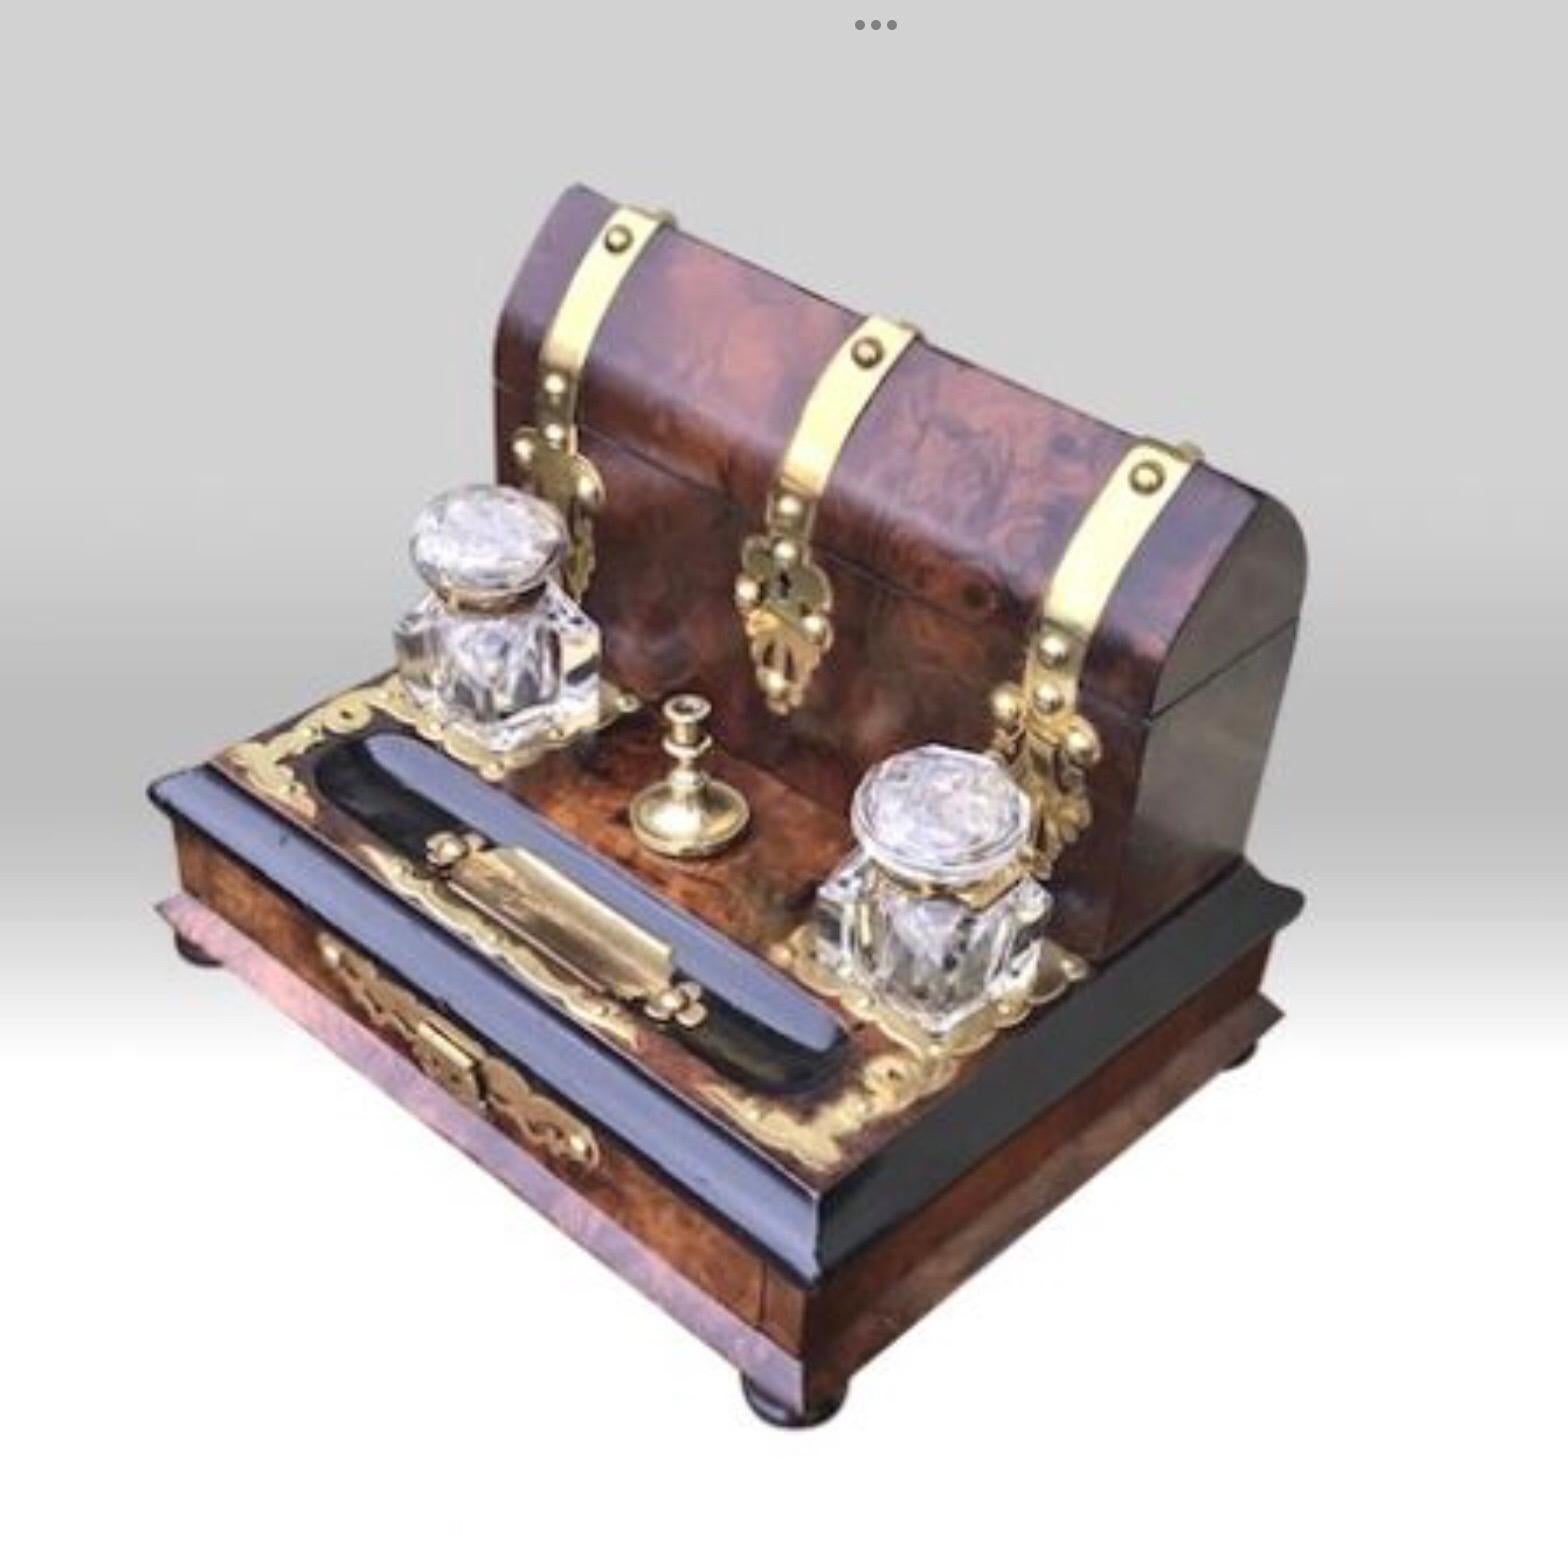 Stunning brass bound burr walnut antique letter writing box
Complete with ink wells, wax seal candle stick, letter compartment and drawer.
Working lock and key.
Dated 1872
Measures: 12ins x 10ins x 10ins
£1250.
   